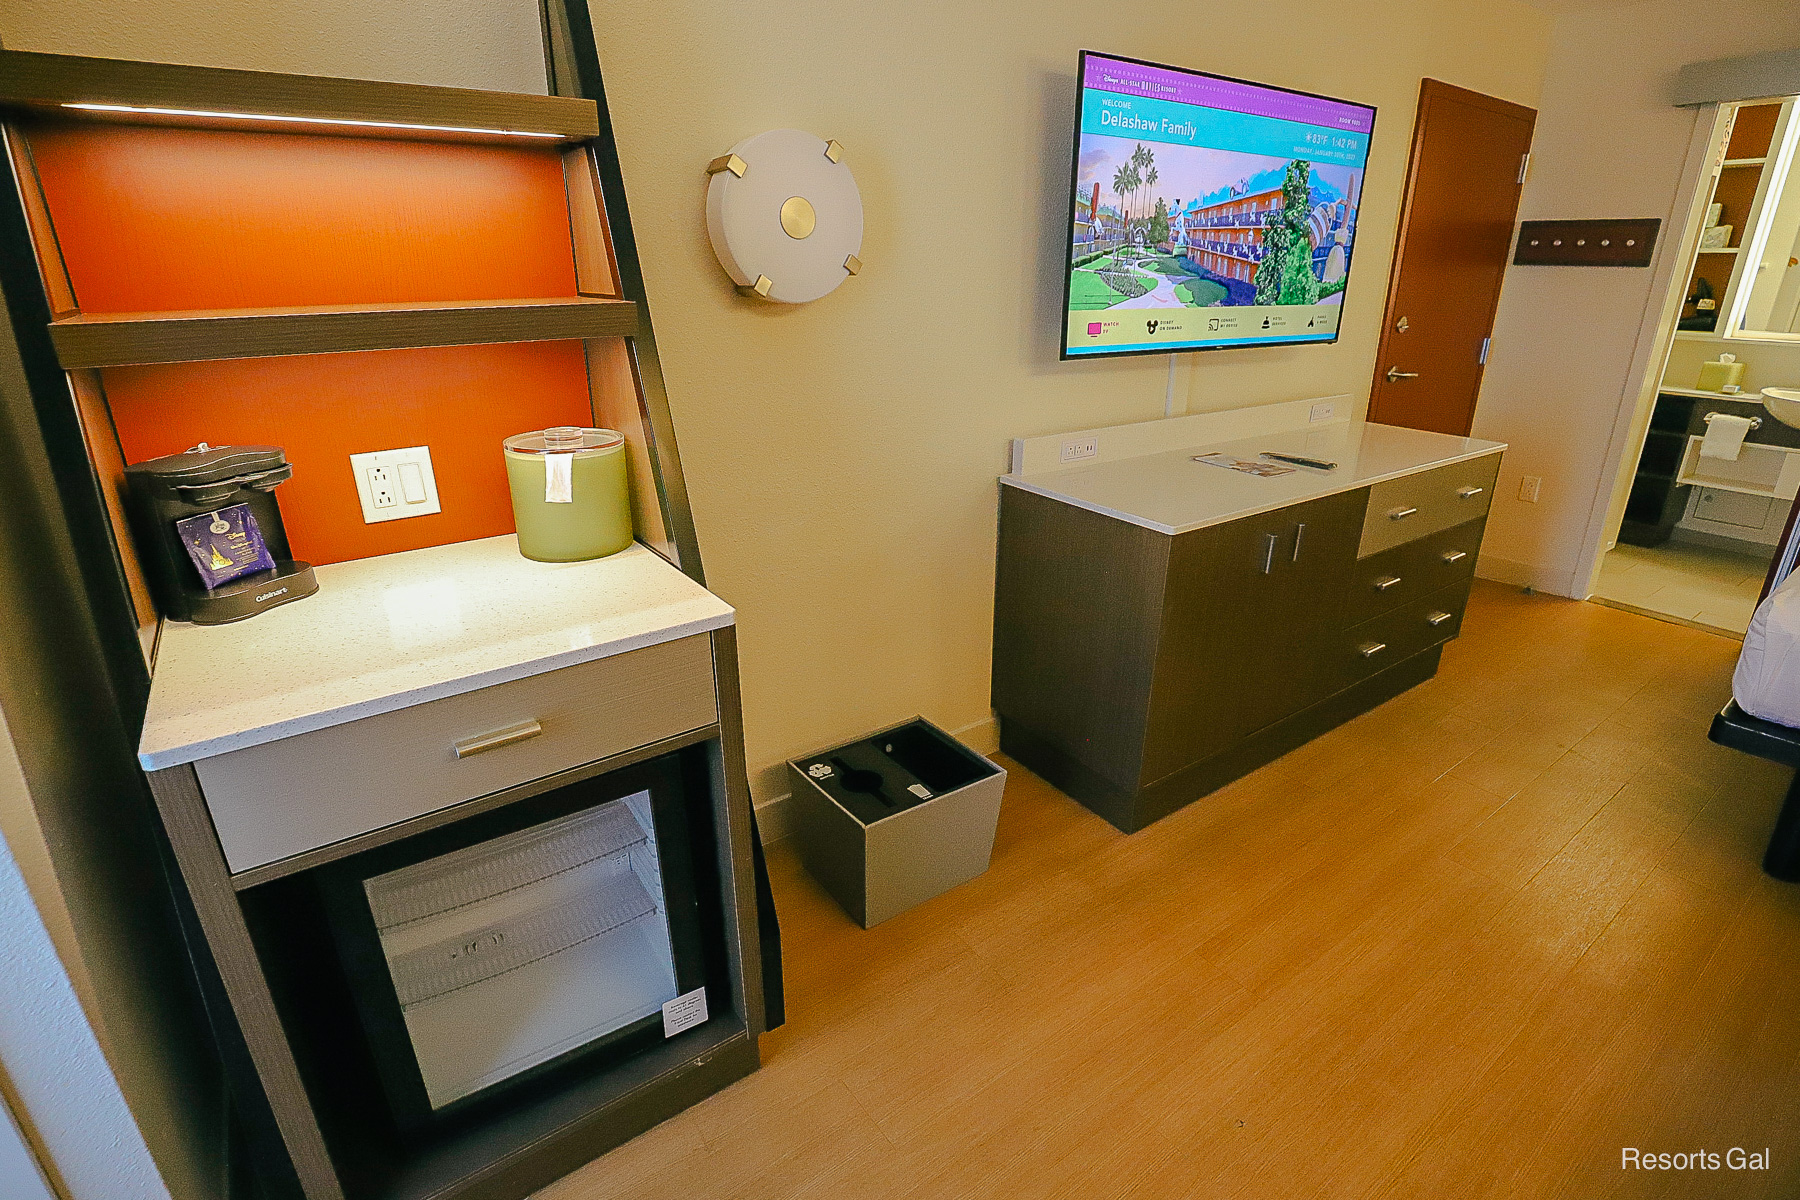 the storage shelf, beverage cooler, dresser, and television in the room 